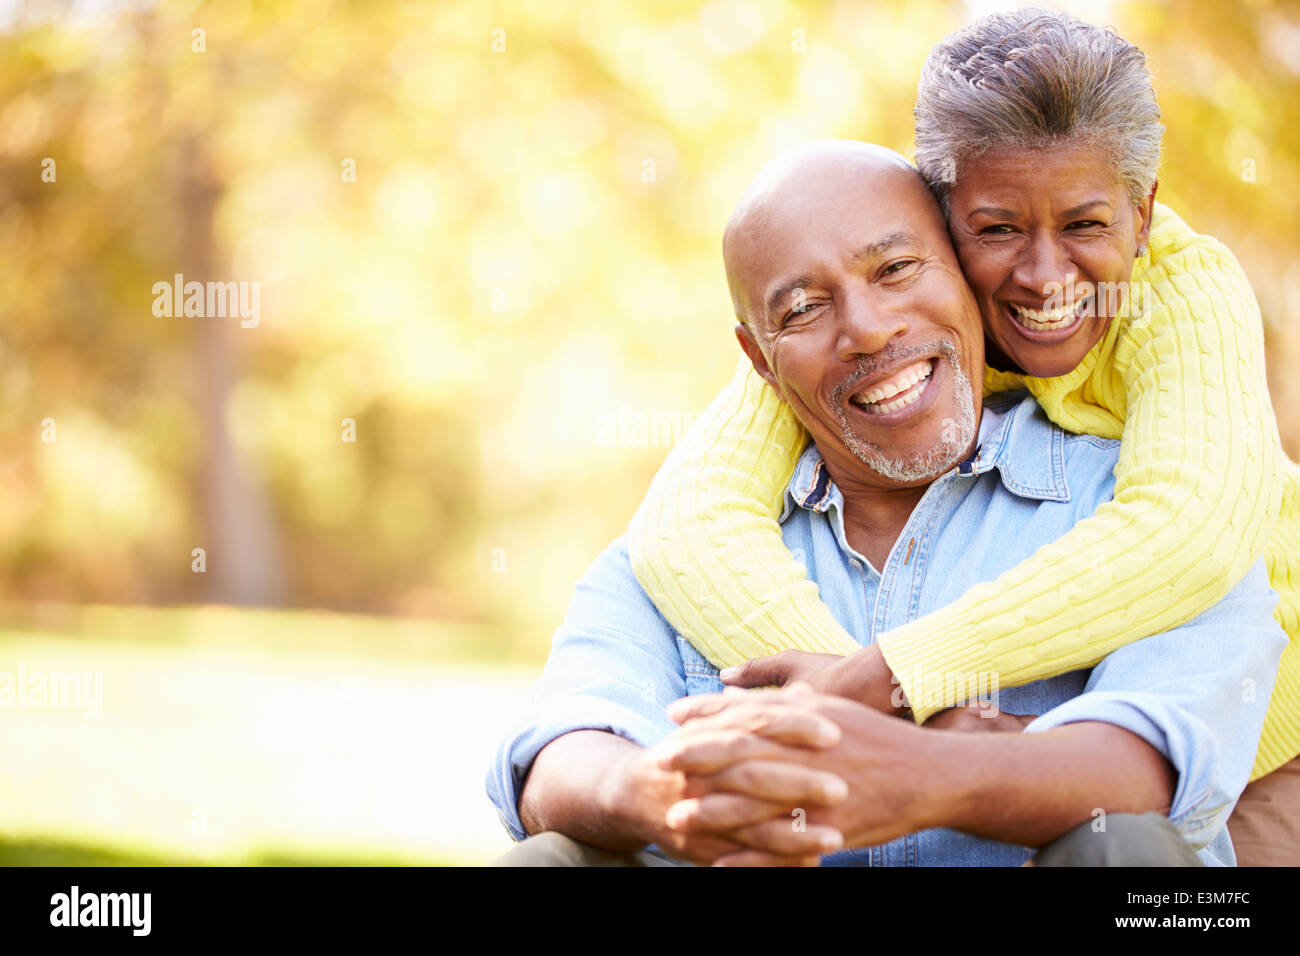 Senior Couple Relaxing In Paysage d'automne Banque D'Images